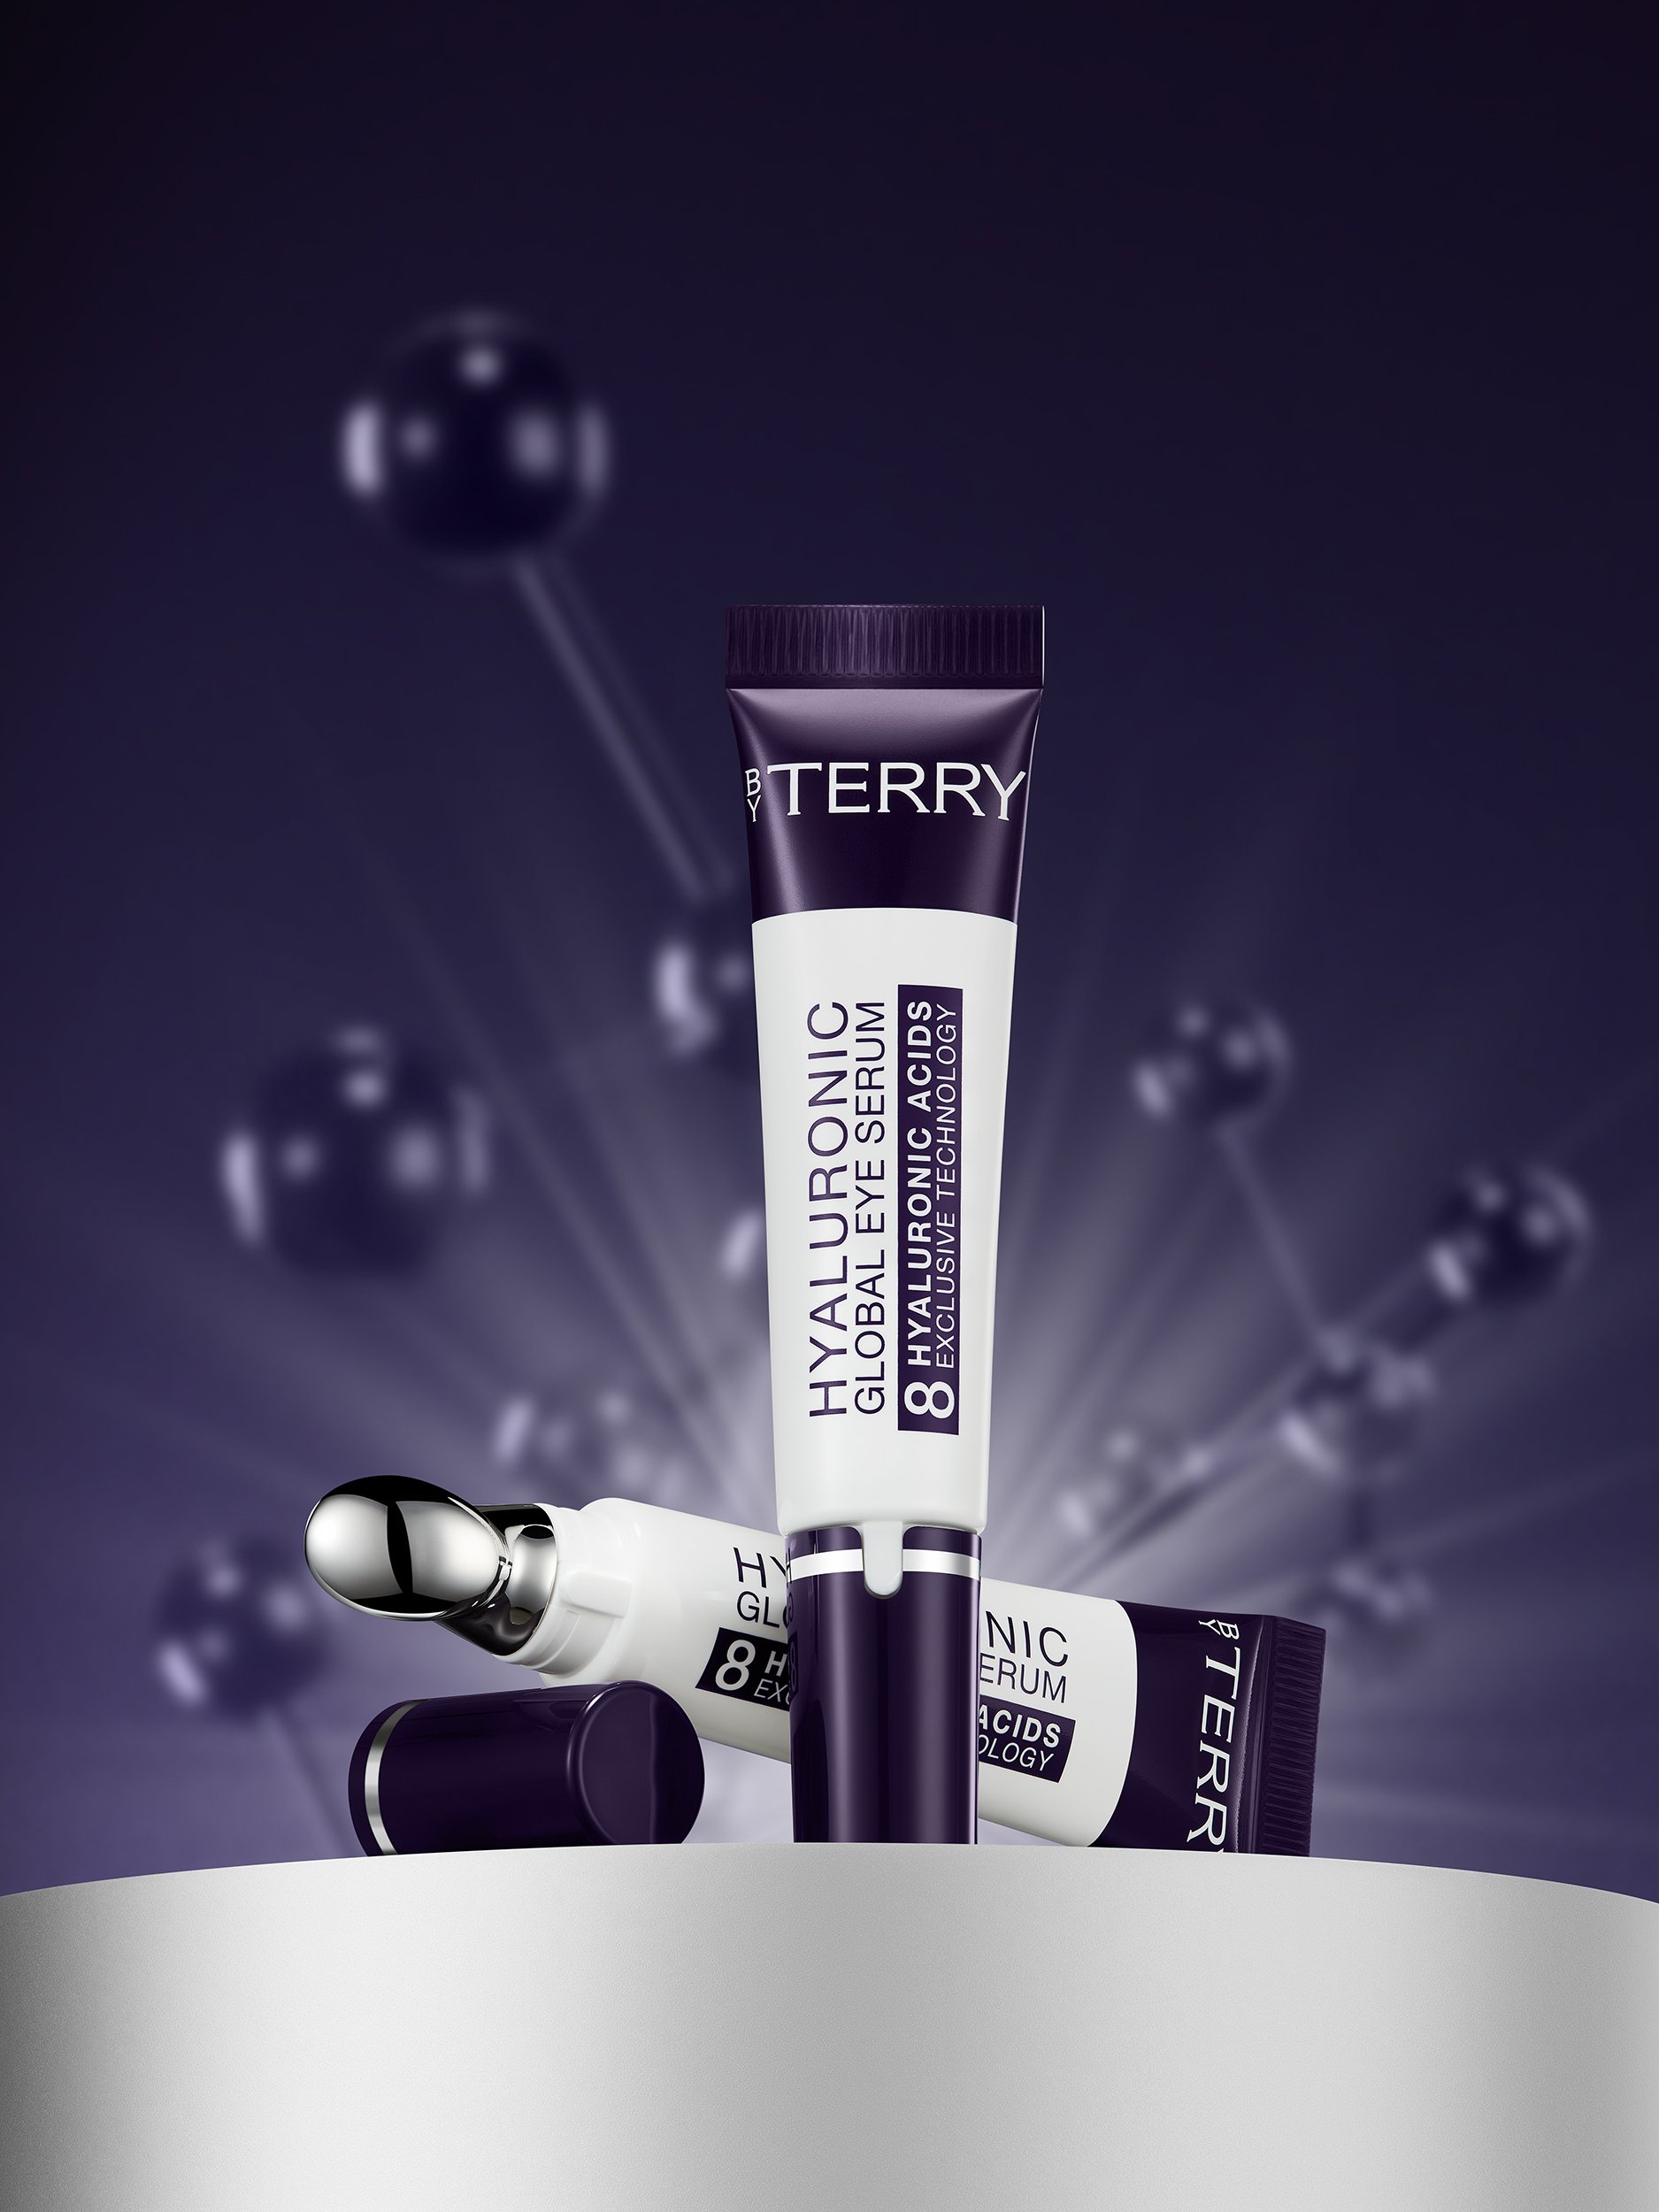 ByTerry Hyaluronic Global Hydration - Advertising by London-based cosmetics photographer Simon Lyle Ritchie